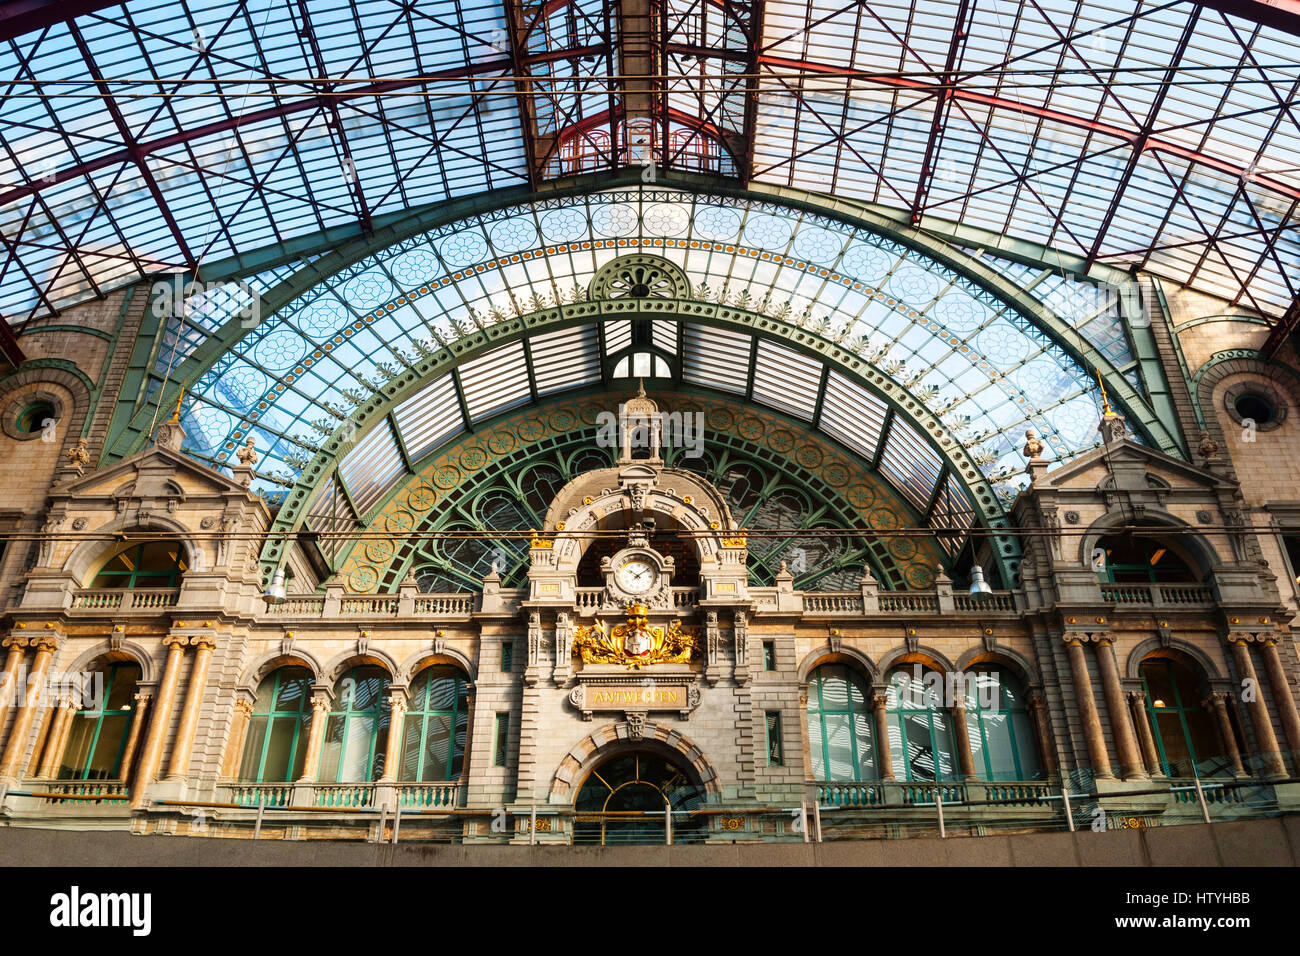 ANTWERP, BELGIUM - MARCH 17:  The interior of Antwerp central train station on March 17, 2015 Stock Photo